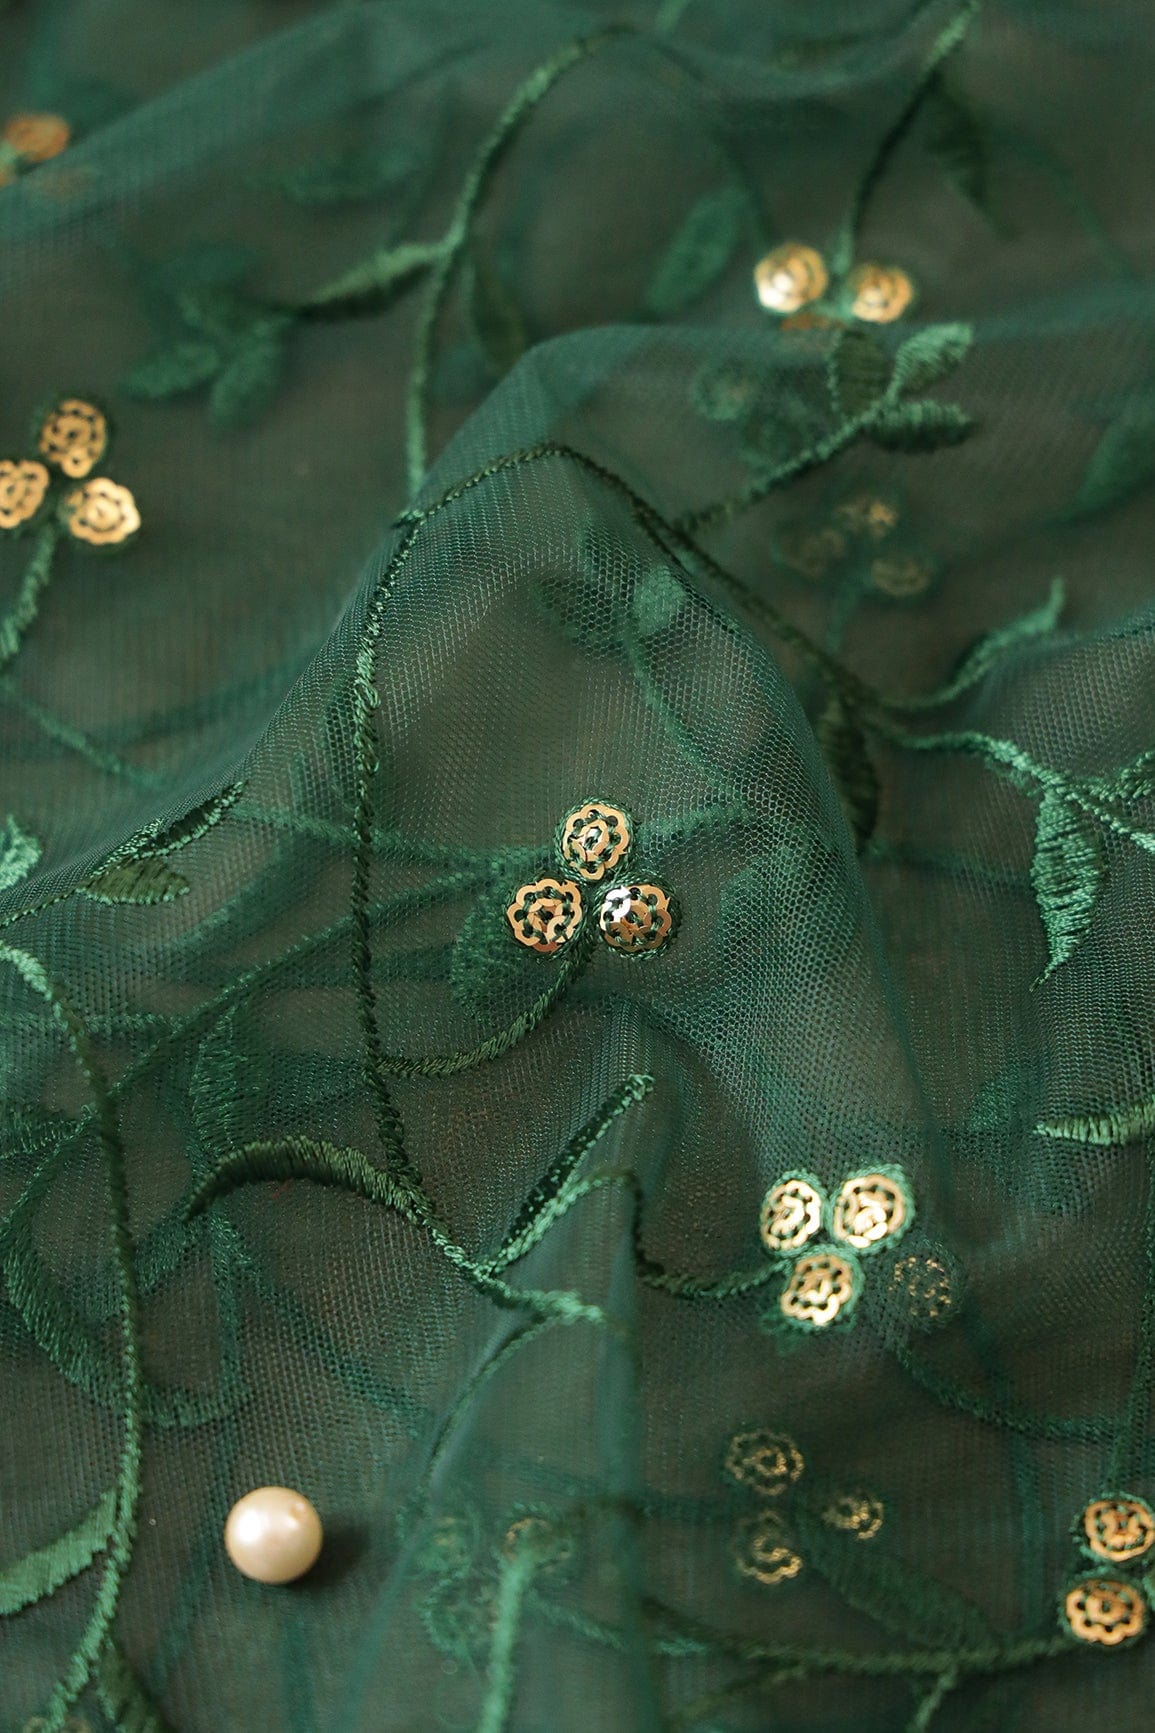 doeraa Embroidery Fabrics 3 Meter Cut Piece Of Gold Sequins With Green Thread Beautiful Floral Embroidery Work On Bottle Green Soft Net Fabric